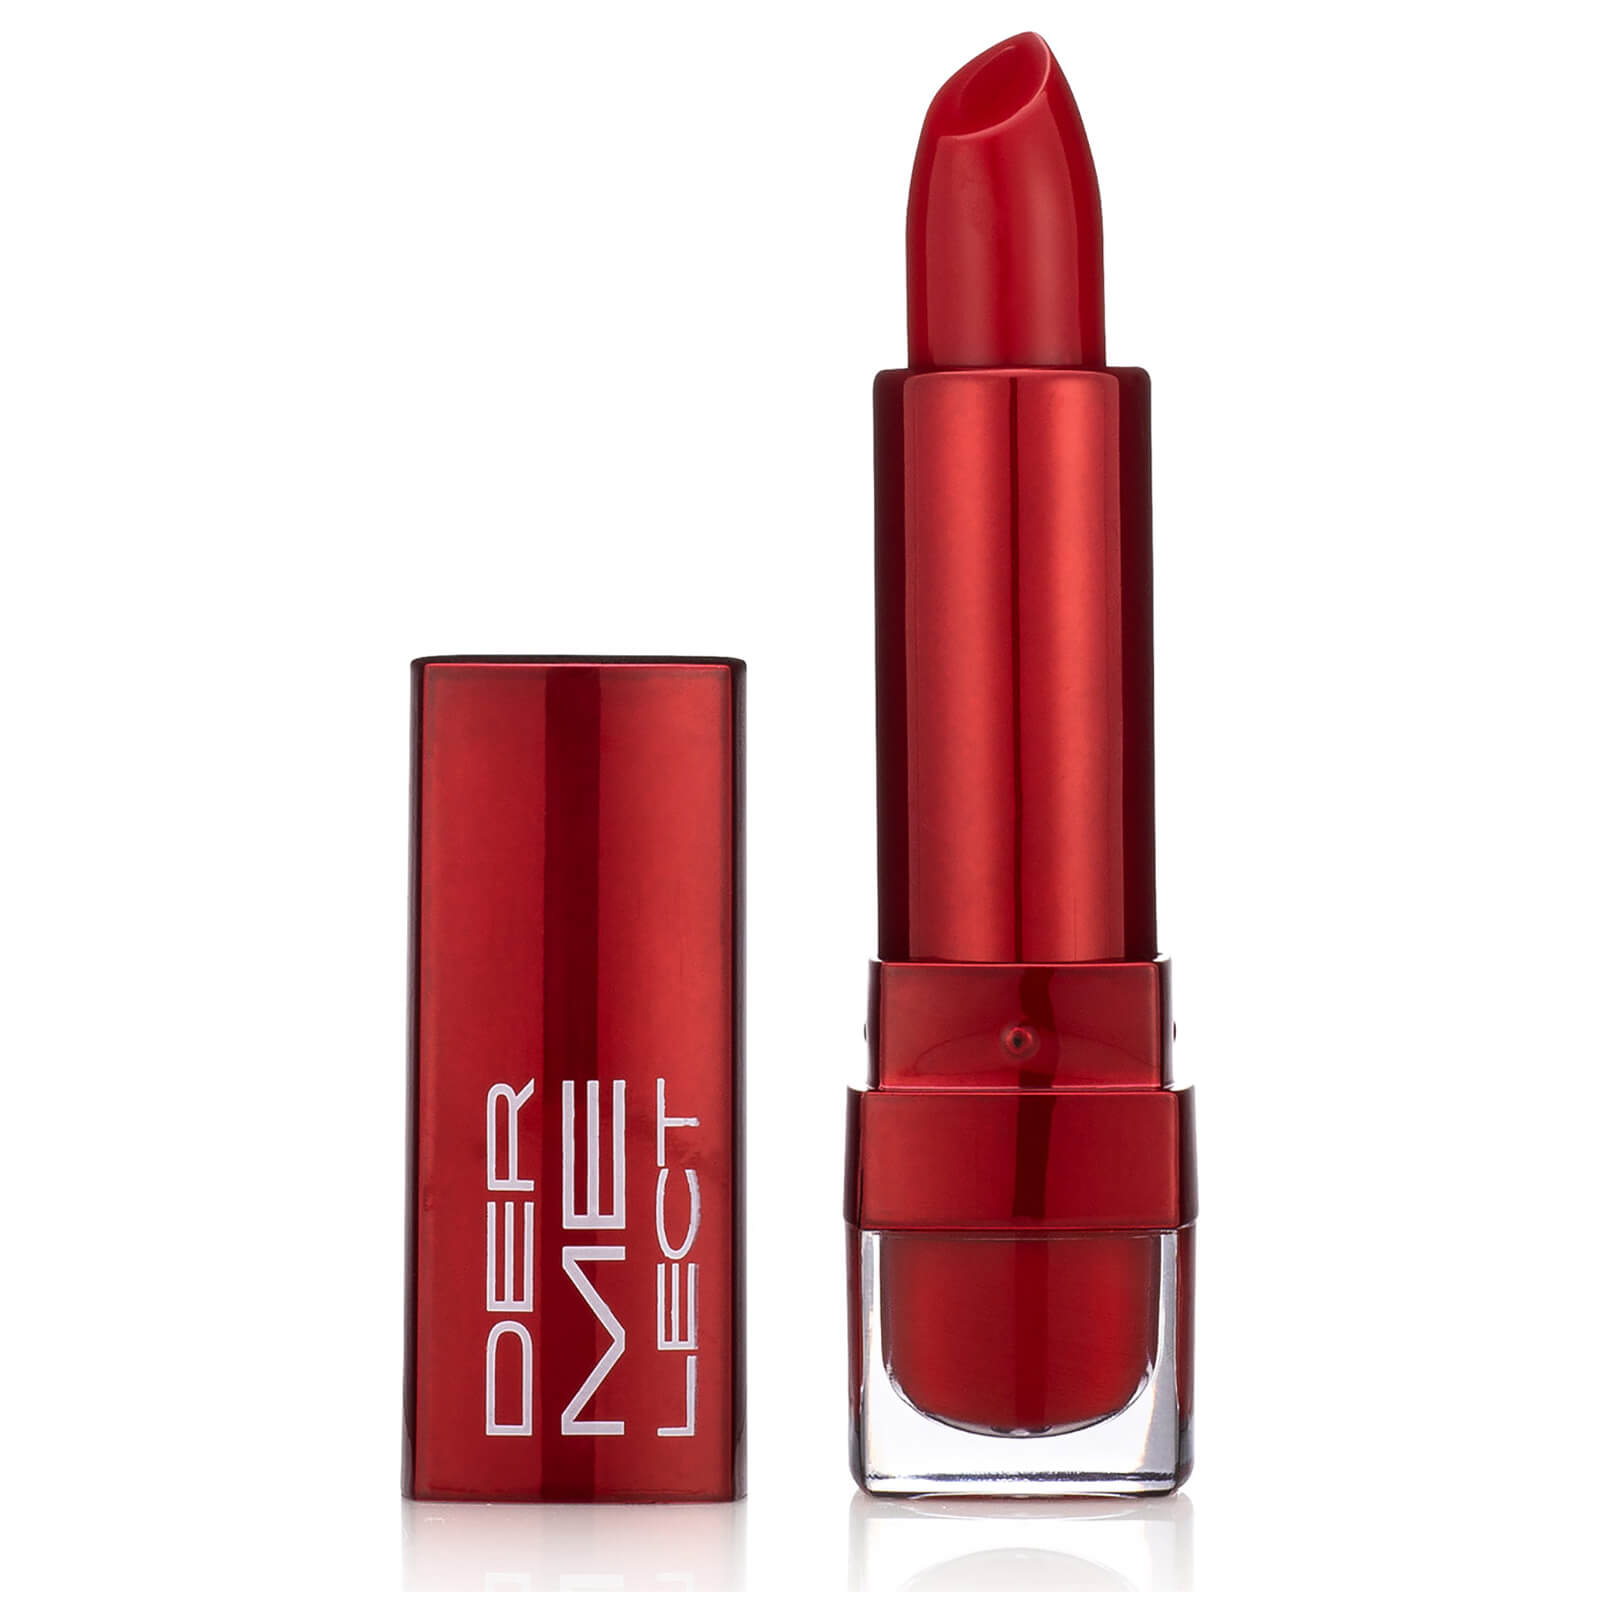 Shop Dermelect Cosmeceuticals Dermelect Smooth And Plump Lipstick - Illicit Chinese Rouge